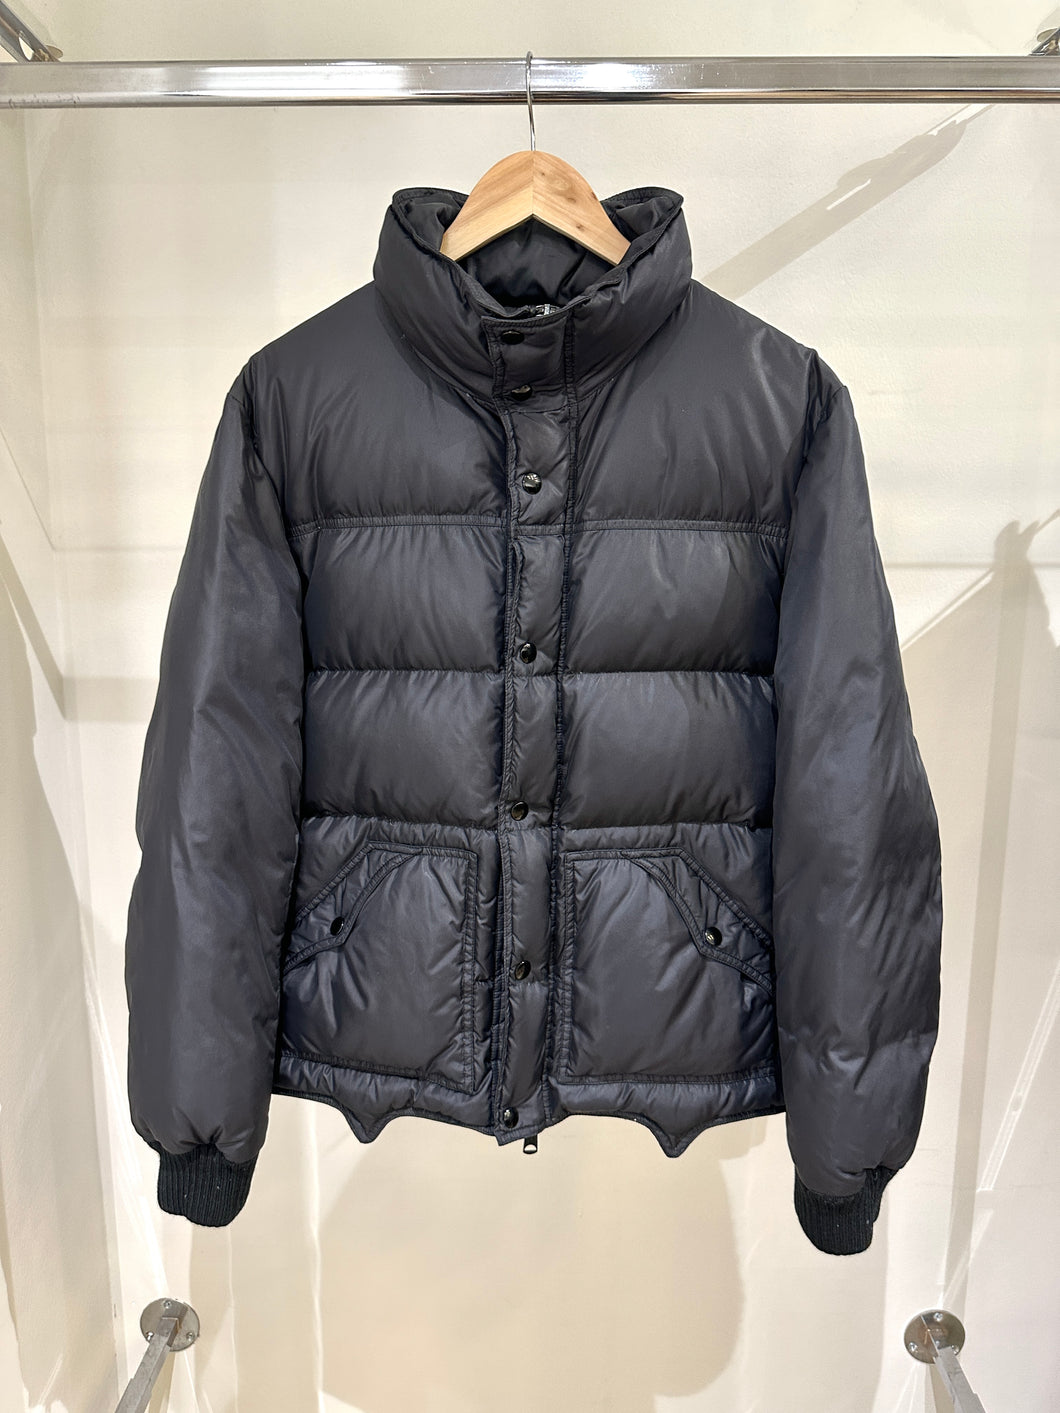 AW2006 Dior Homme by Hedi Slimane goose down puffer jacket